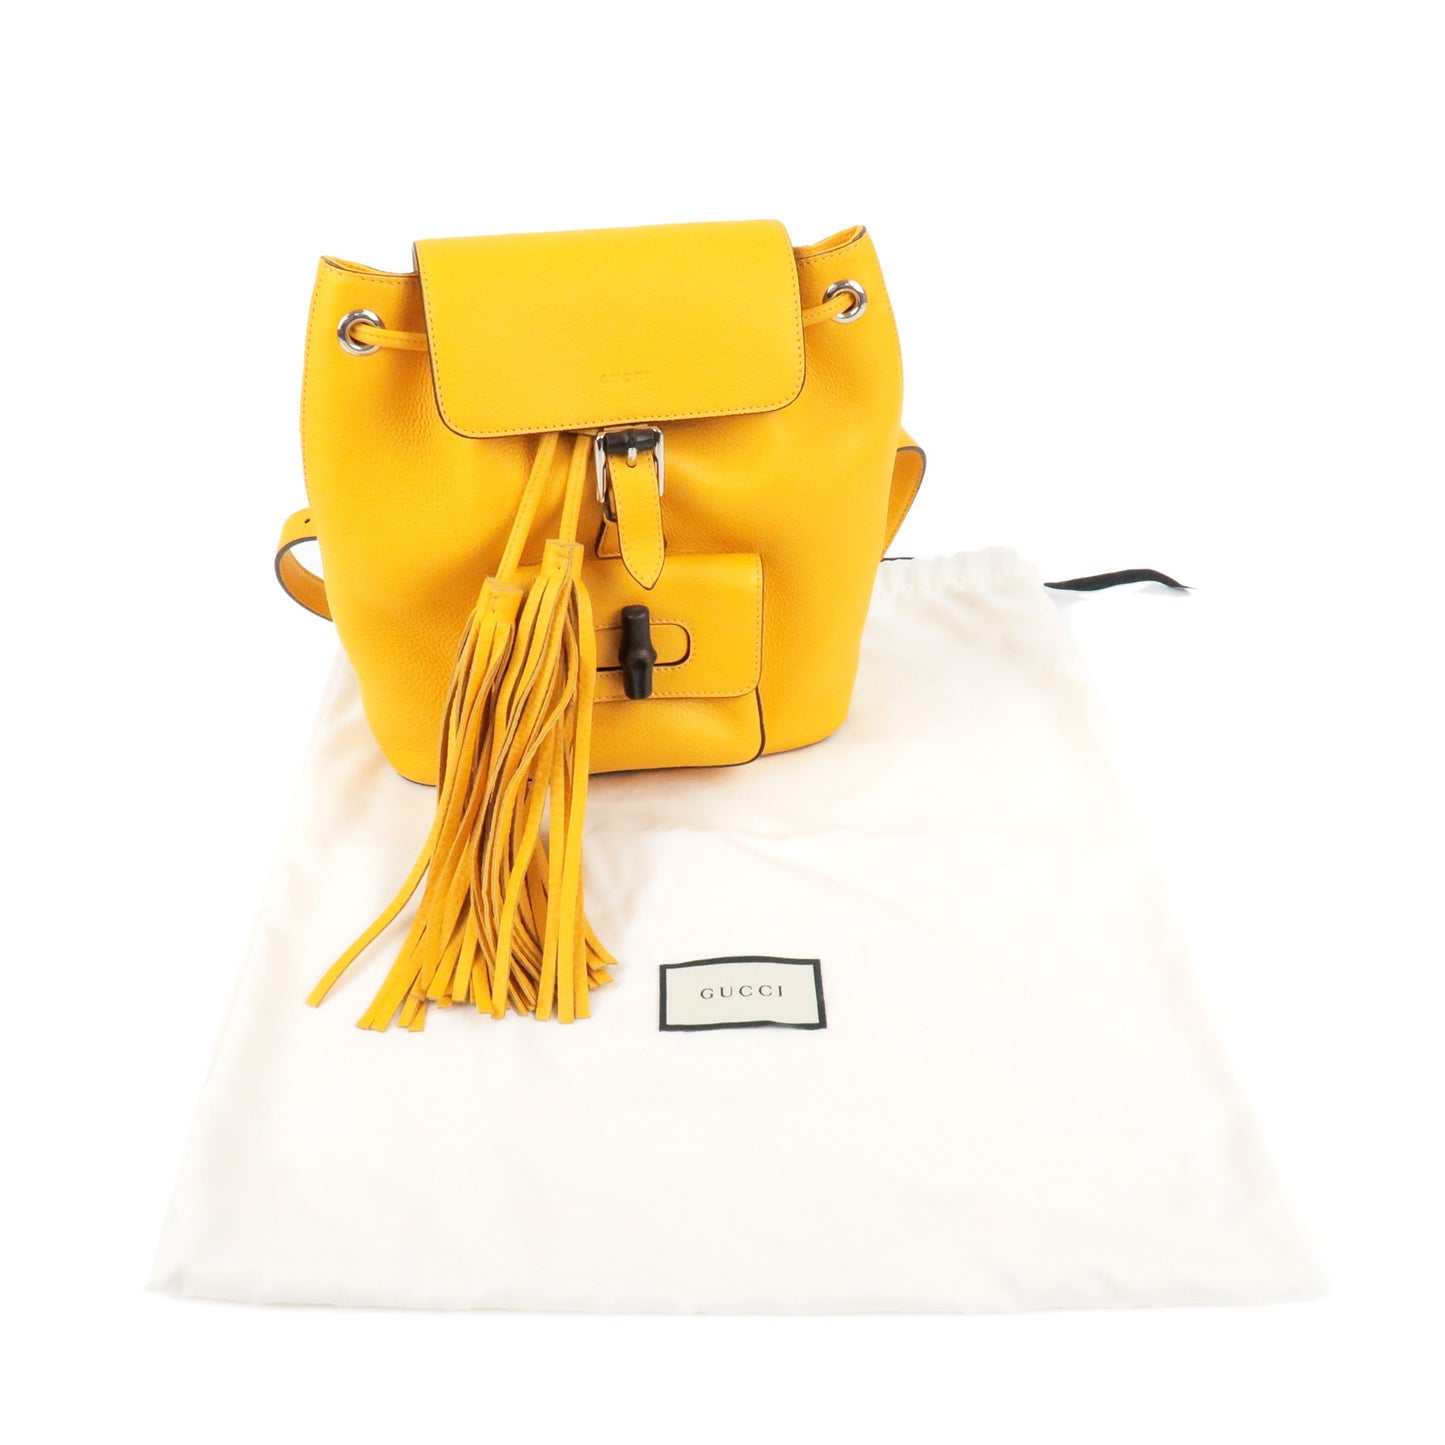 GUCCI Bamboo Back Pack With Fringe Leather Yellow 387149